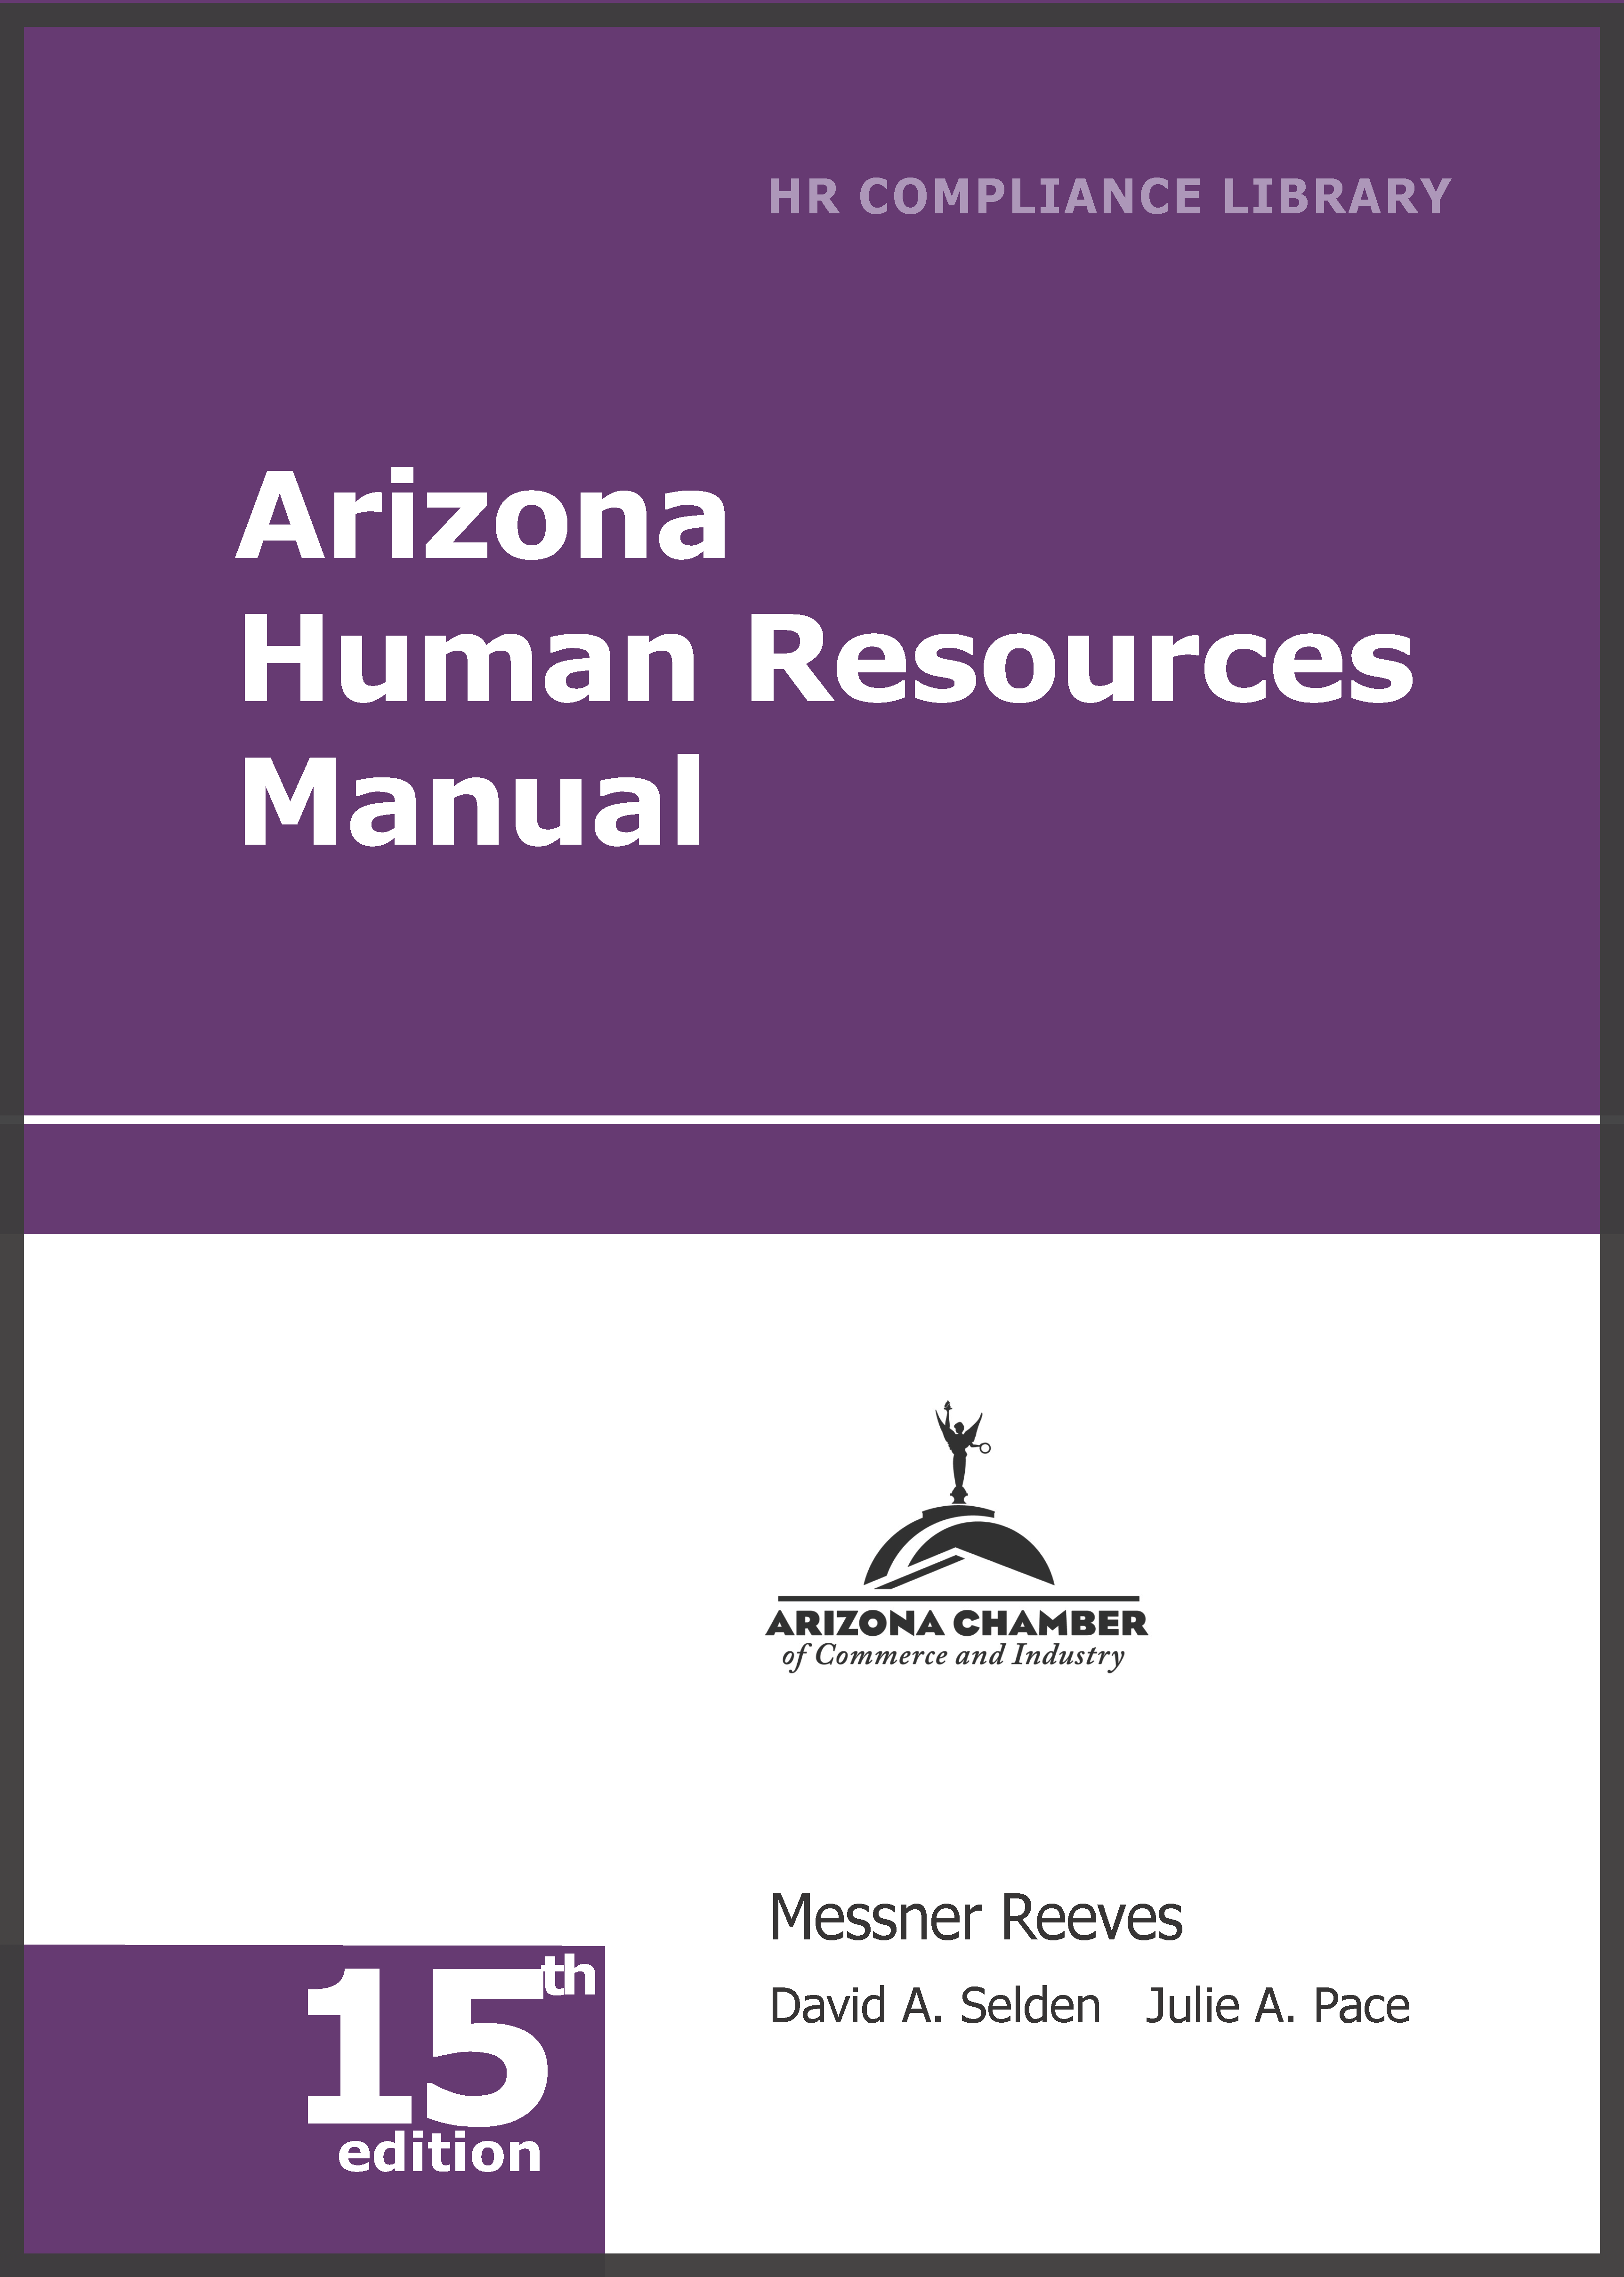 Arizona Human Resources Library—Online Only employment law image, remote work, labor laws, employment laws, right to work, order of protection, minimum wage